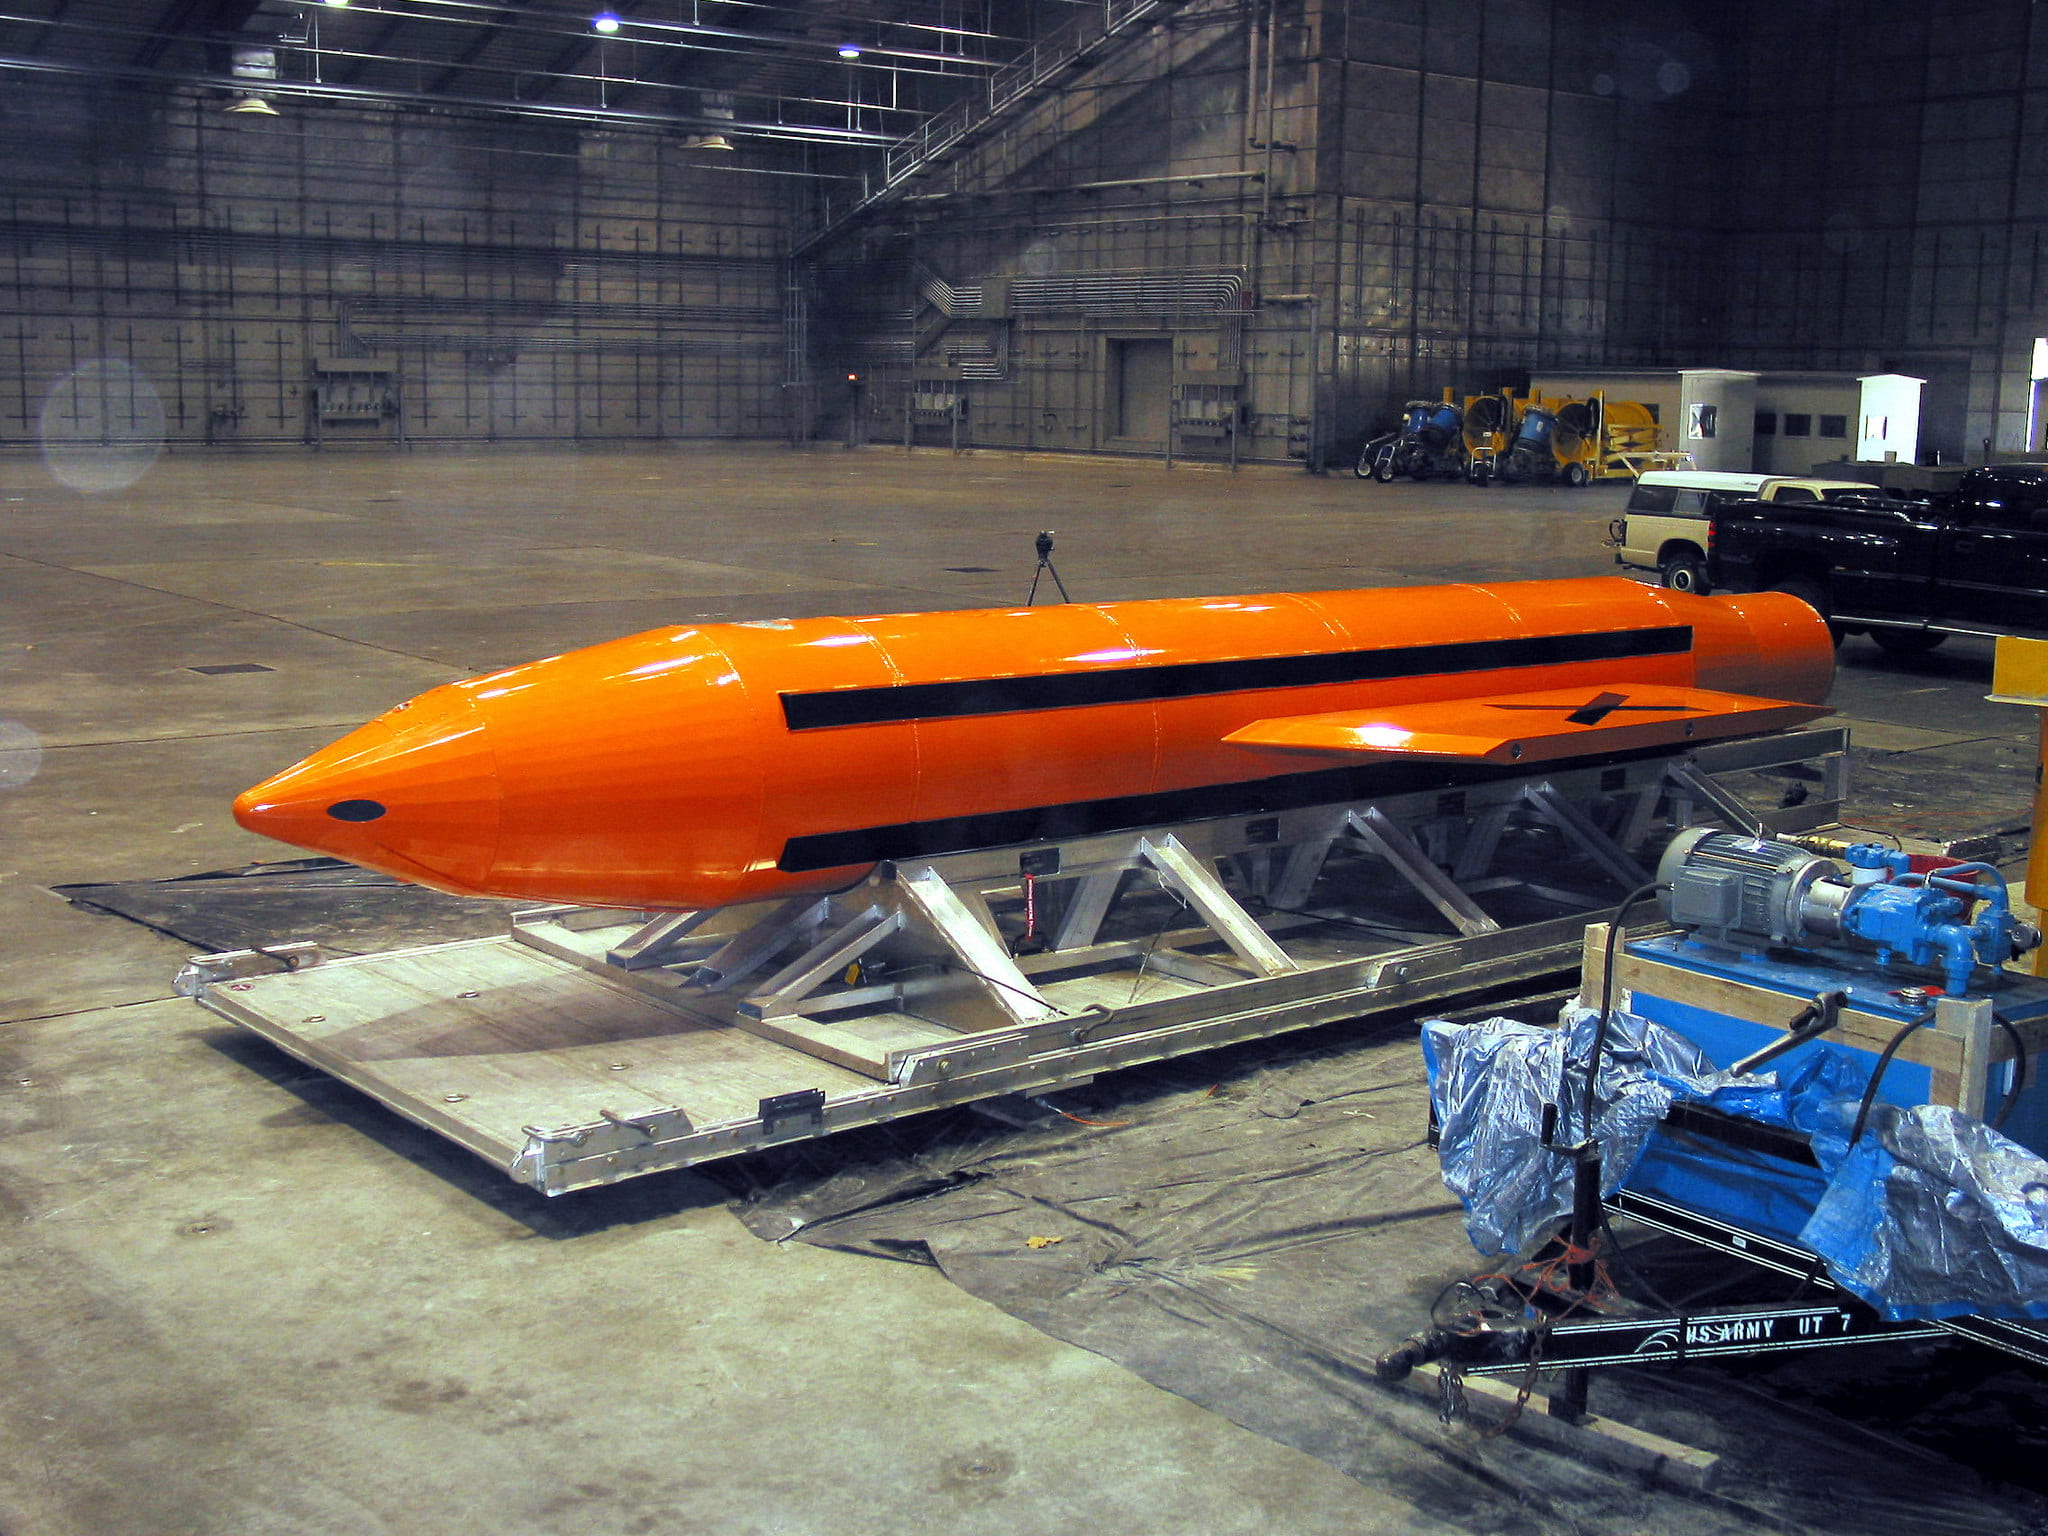 MOAB: Blown Out of Proportion?